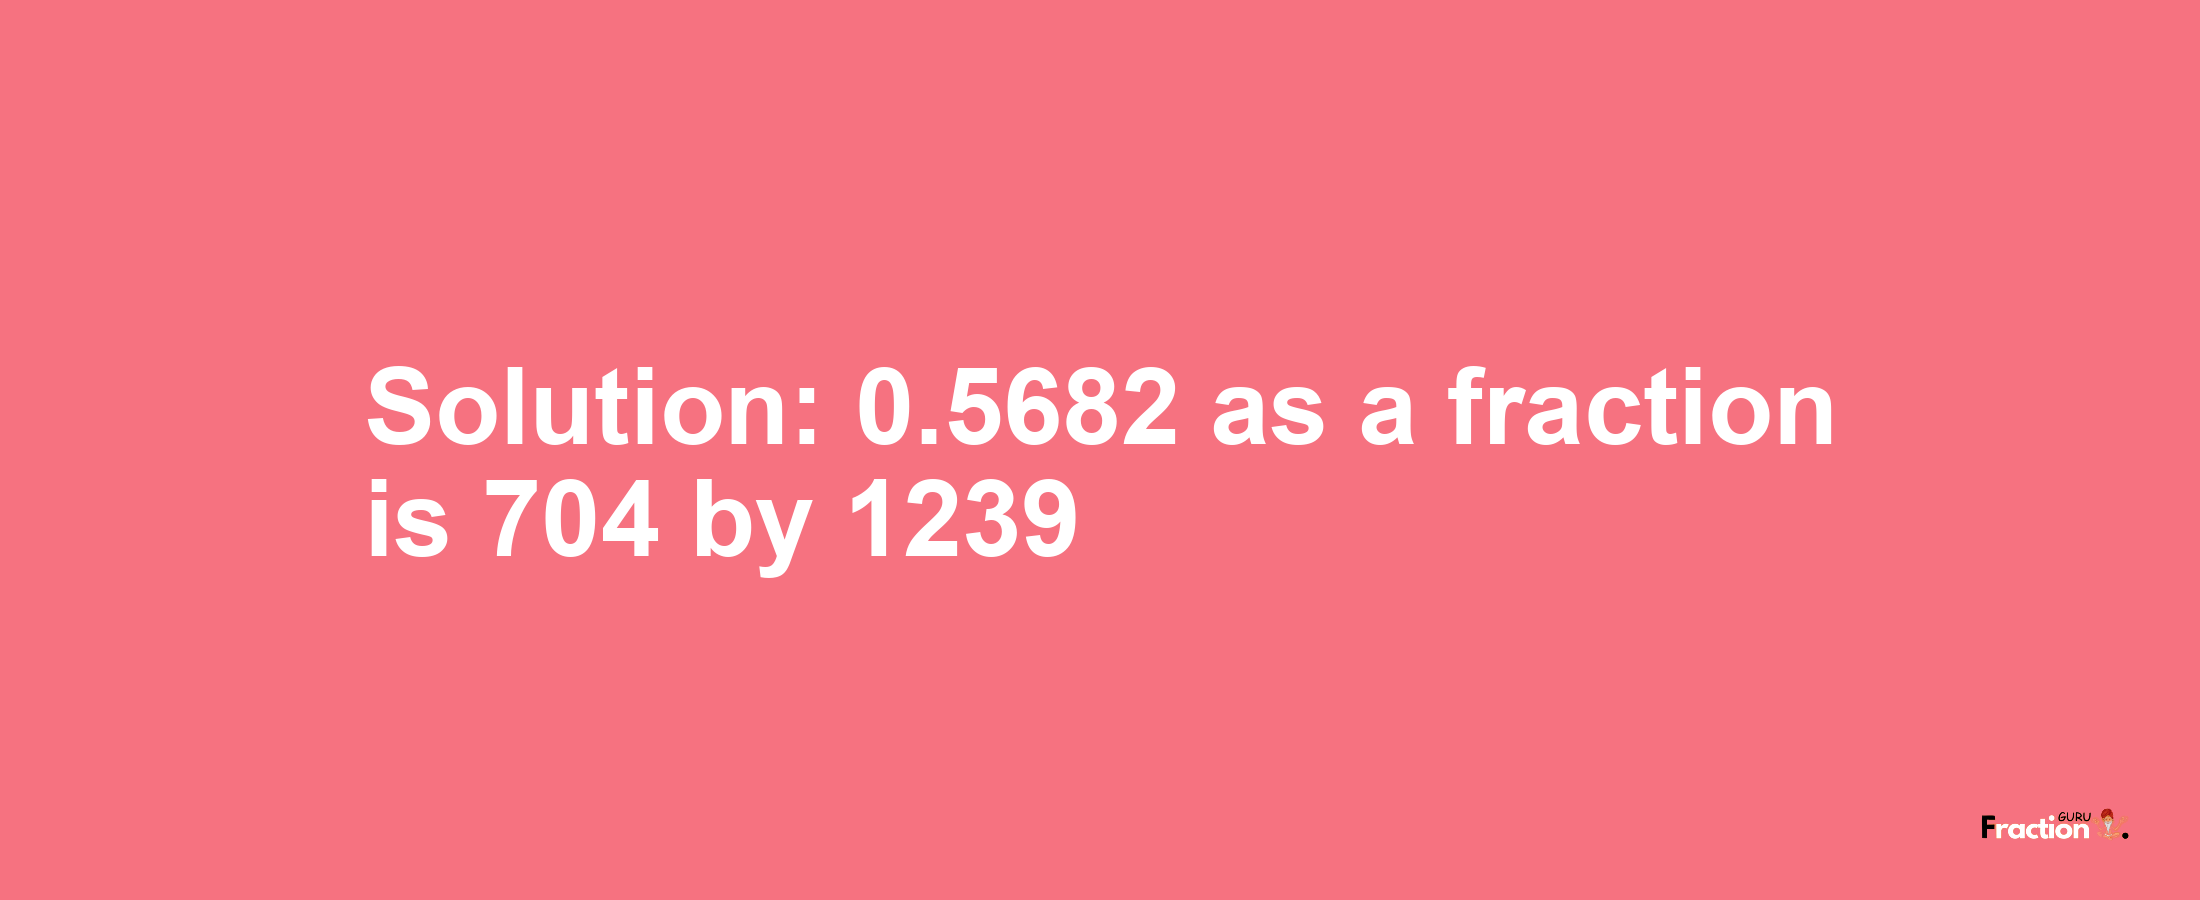 Solution:0.5682 as a fraction is 704/1239